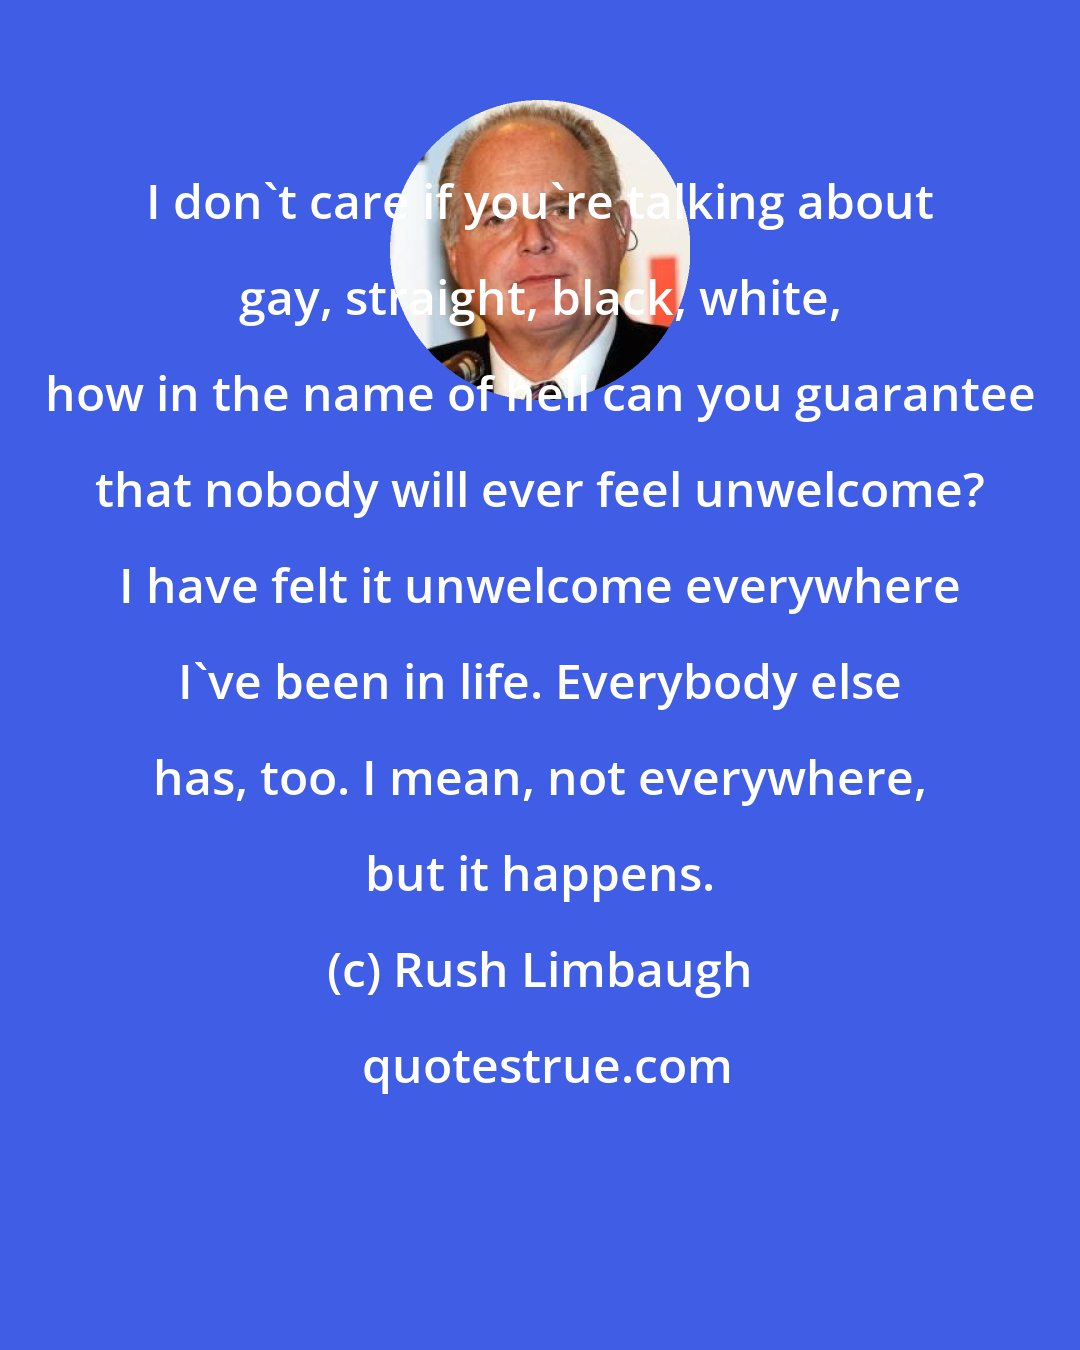 Rush Limbaugh: I don't care if you're talking about gay, straight, black, white, how in the name of hell can you guarantee that nobody will ever feel unwelcome? I have felt it unwelcome everywhere I've been in life. Everybody else has, too. I mean, not everywhere, but it happens.